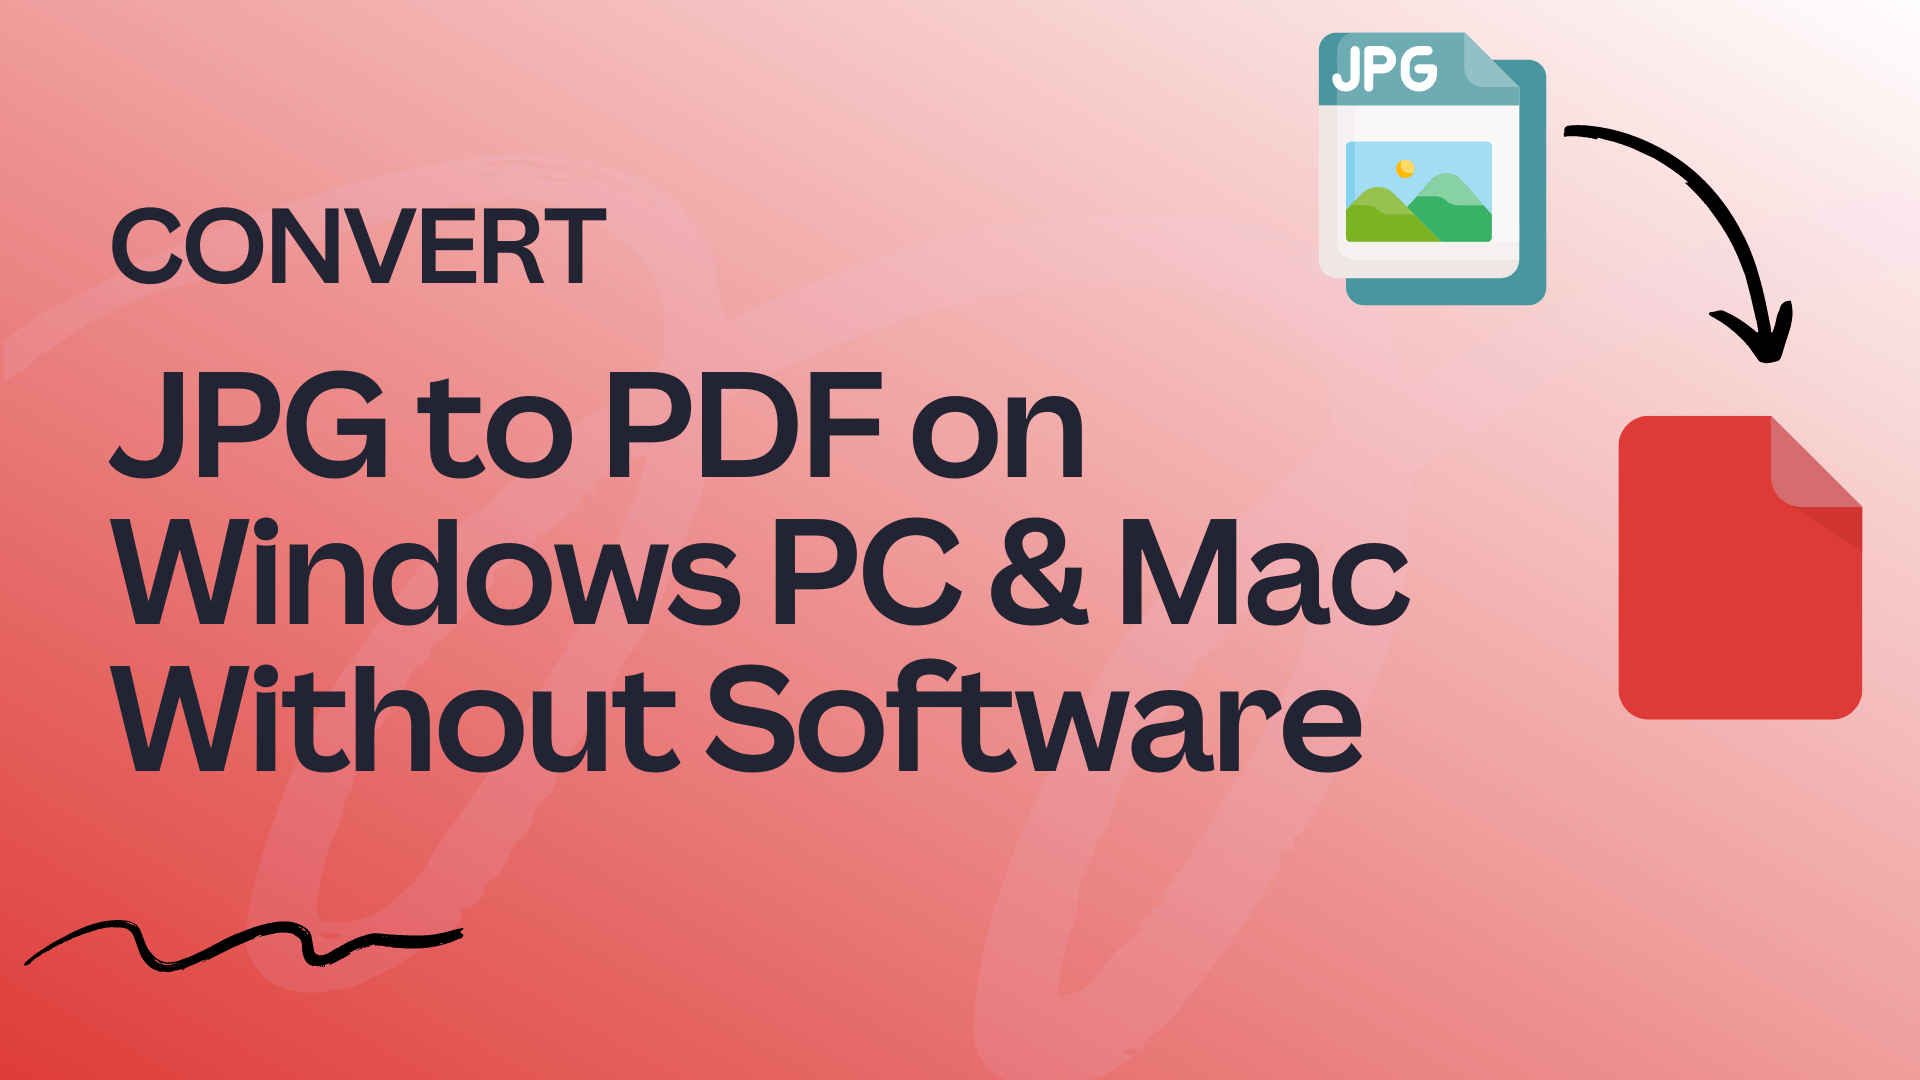 JPG to PDF on Windows PC & Mac Without Software